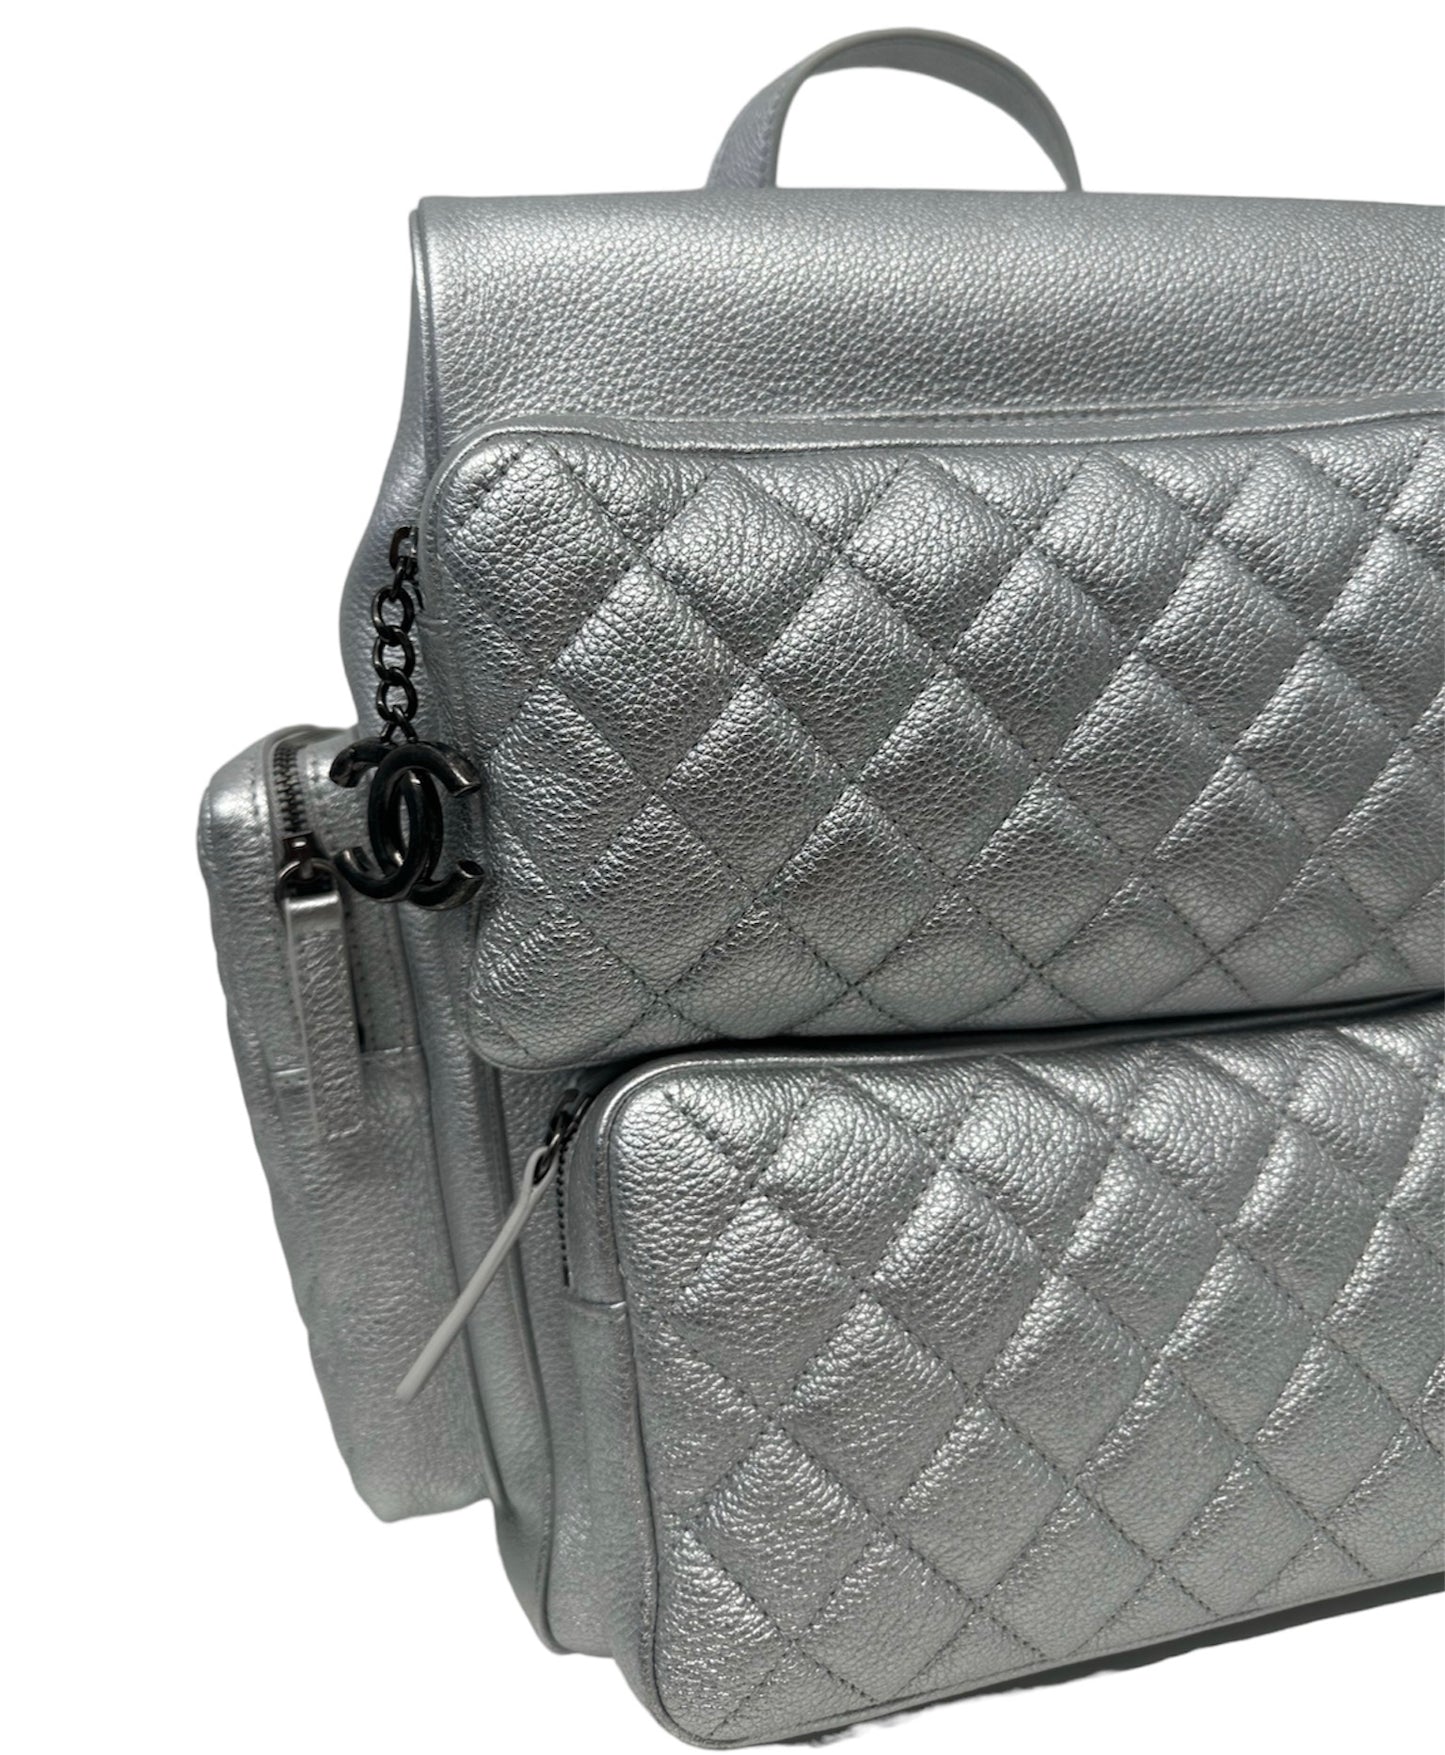 CHANEL - 16S Silver Grained Calfskin Casual Rock Backpack